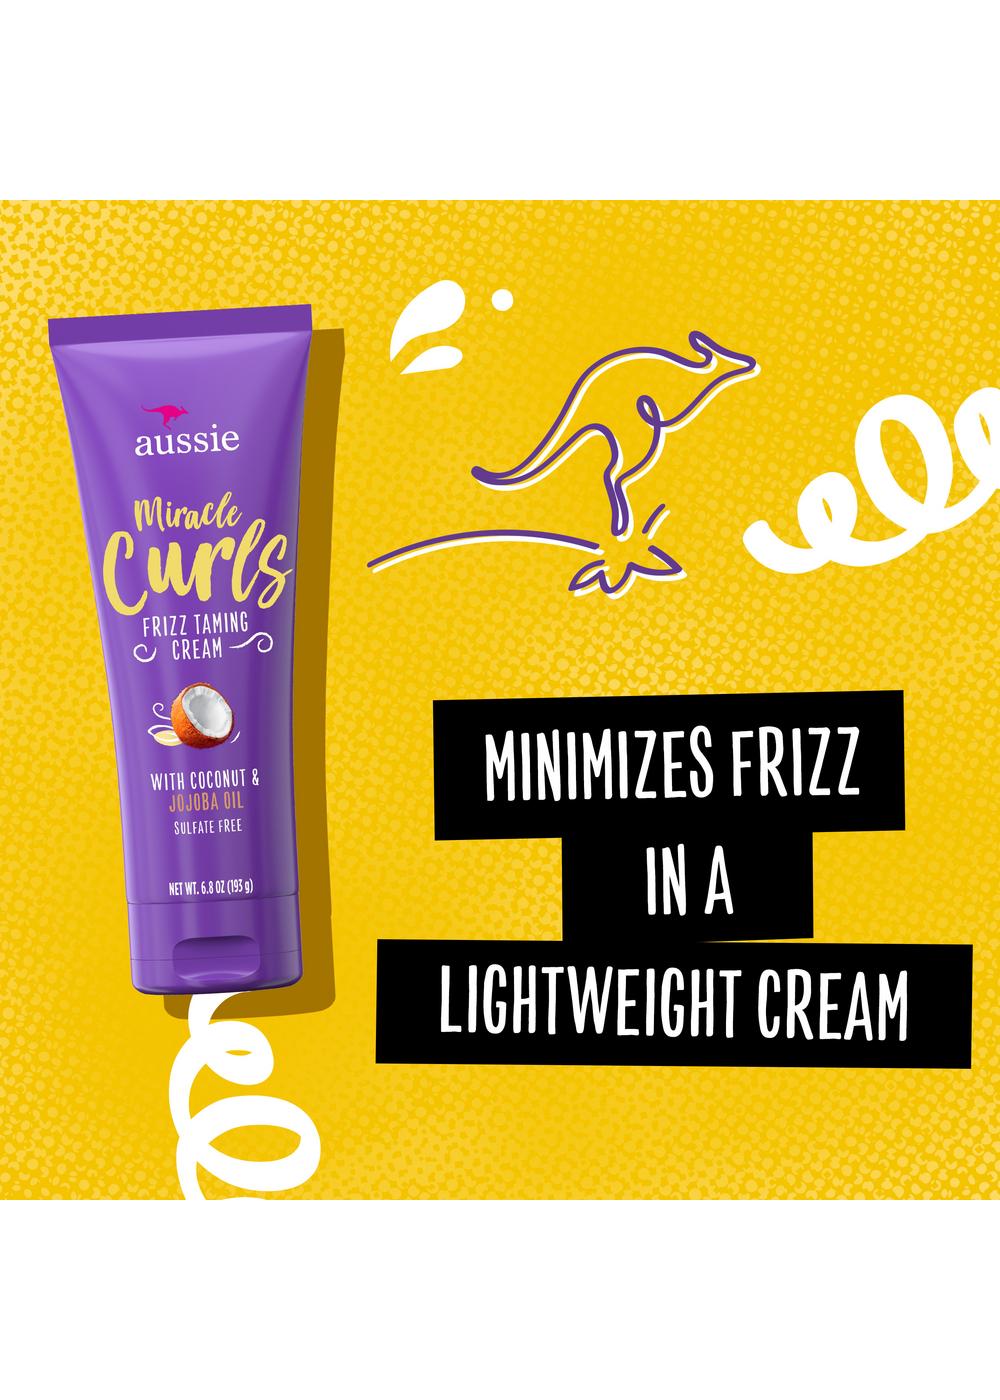 Aussie Miracle Curls Frizz Taming Cream; image 4 of 11